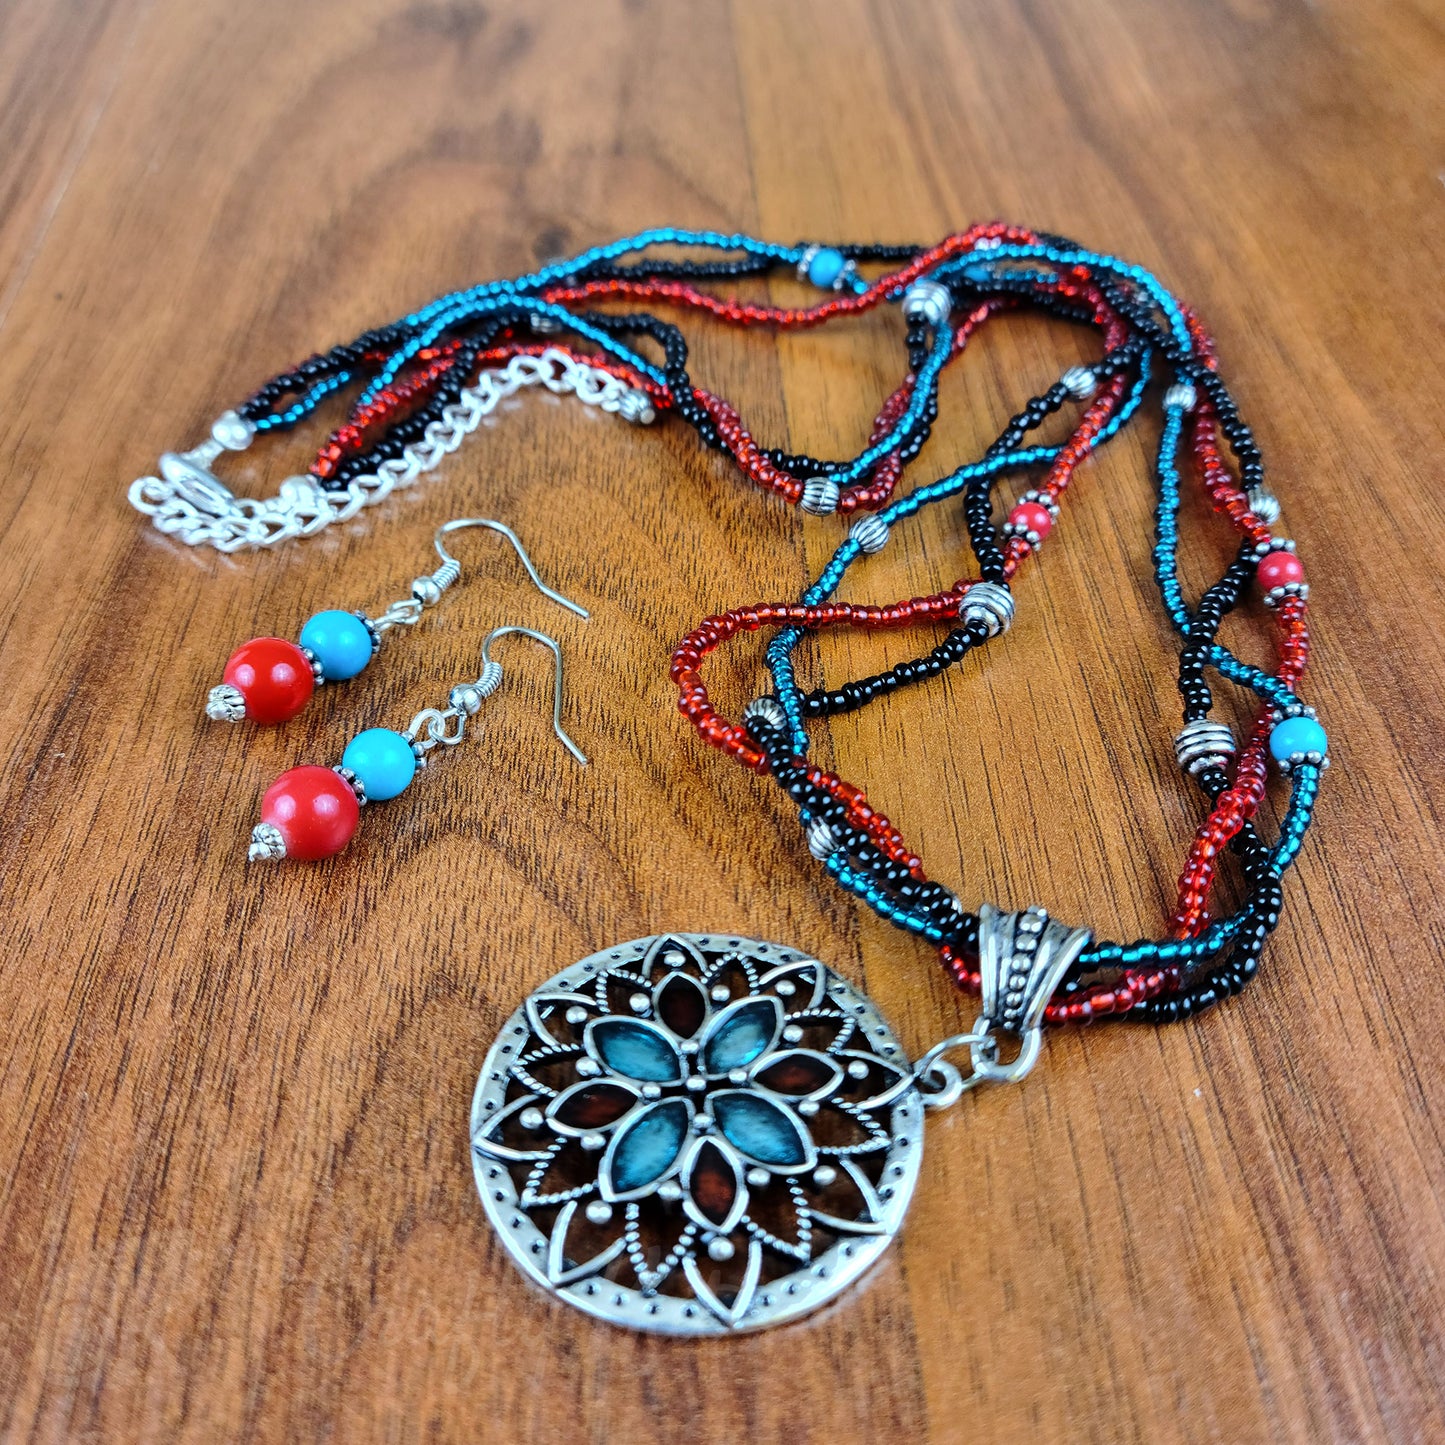 Strands of turquoise, red, and black glass seed beads loosely braided into a strand supporting an antique silver flower pendant filled with turquoise and red enamel; matching turquoise and red resin bead earrings